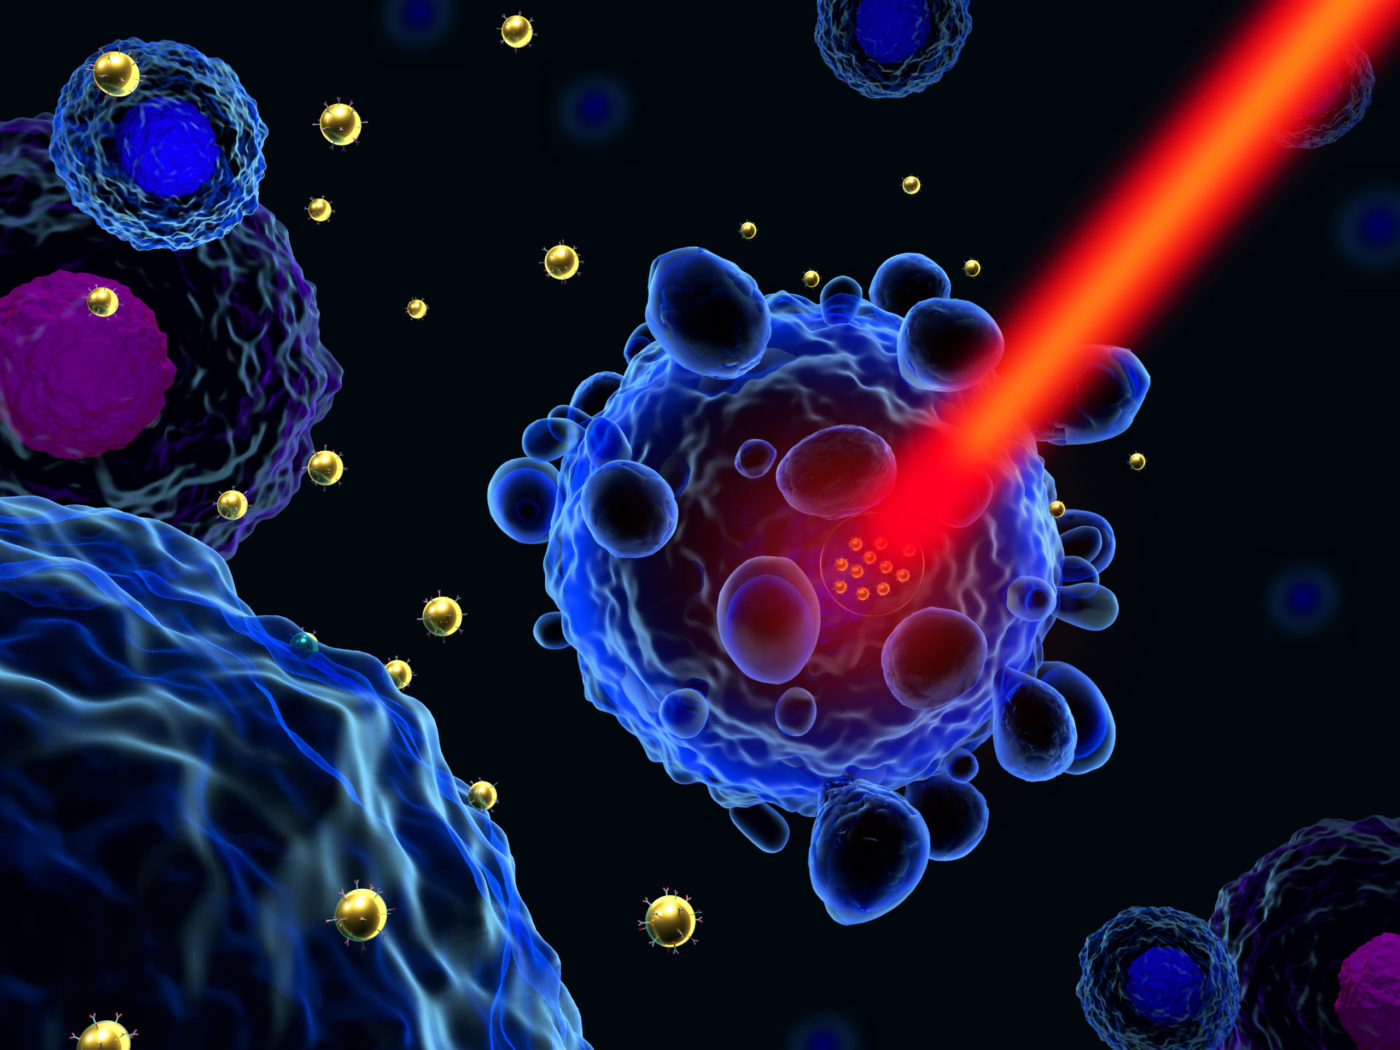 Gold Nanoparticles Produced in Cancer Cells with Novel Technique